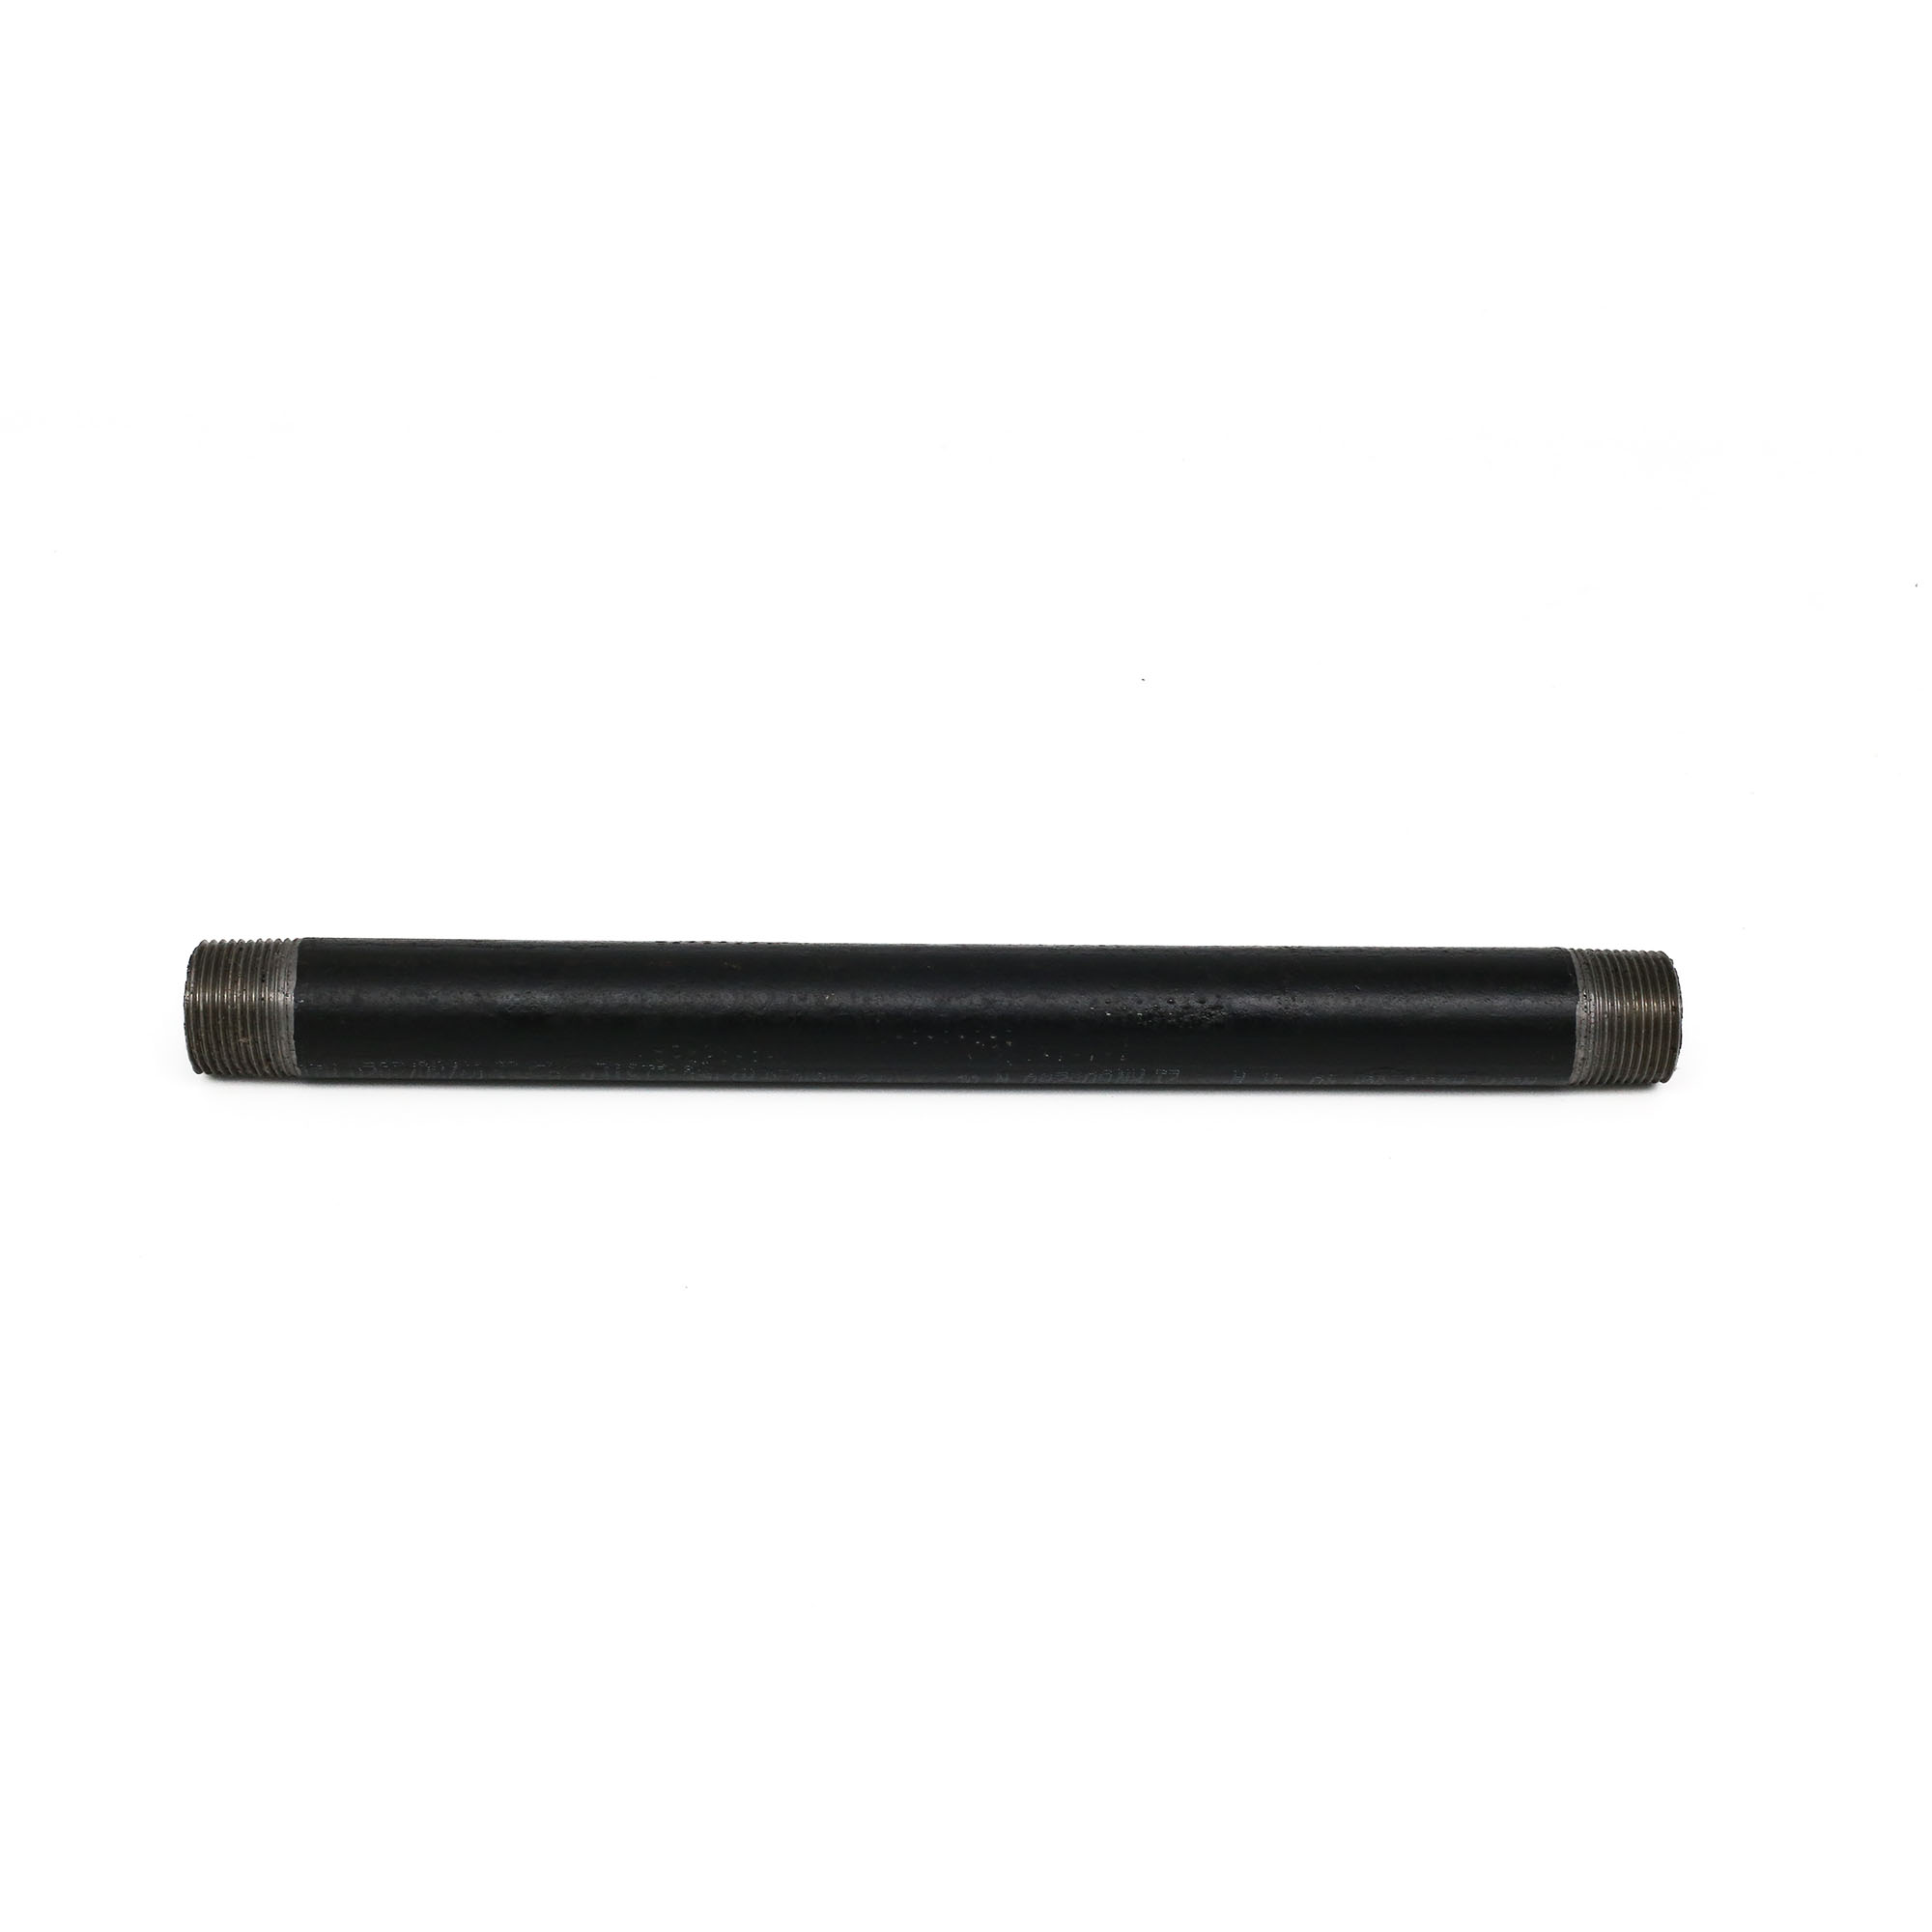 Cabinet Sandblaster Parts, Parts Washer Replacement Parts, Parts & Accessories, 1″ NPT x 13 3/4″ Black Pipe Nipple, 1728 Pipe, American Hawk Industrial, Dee-Blast